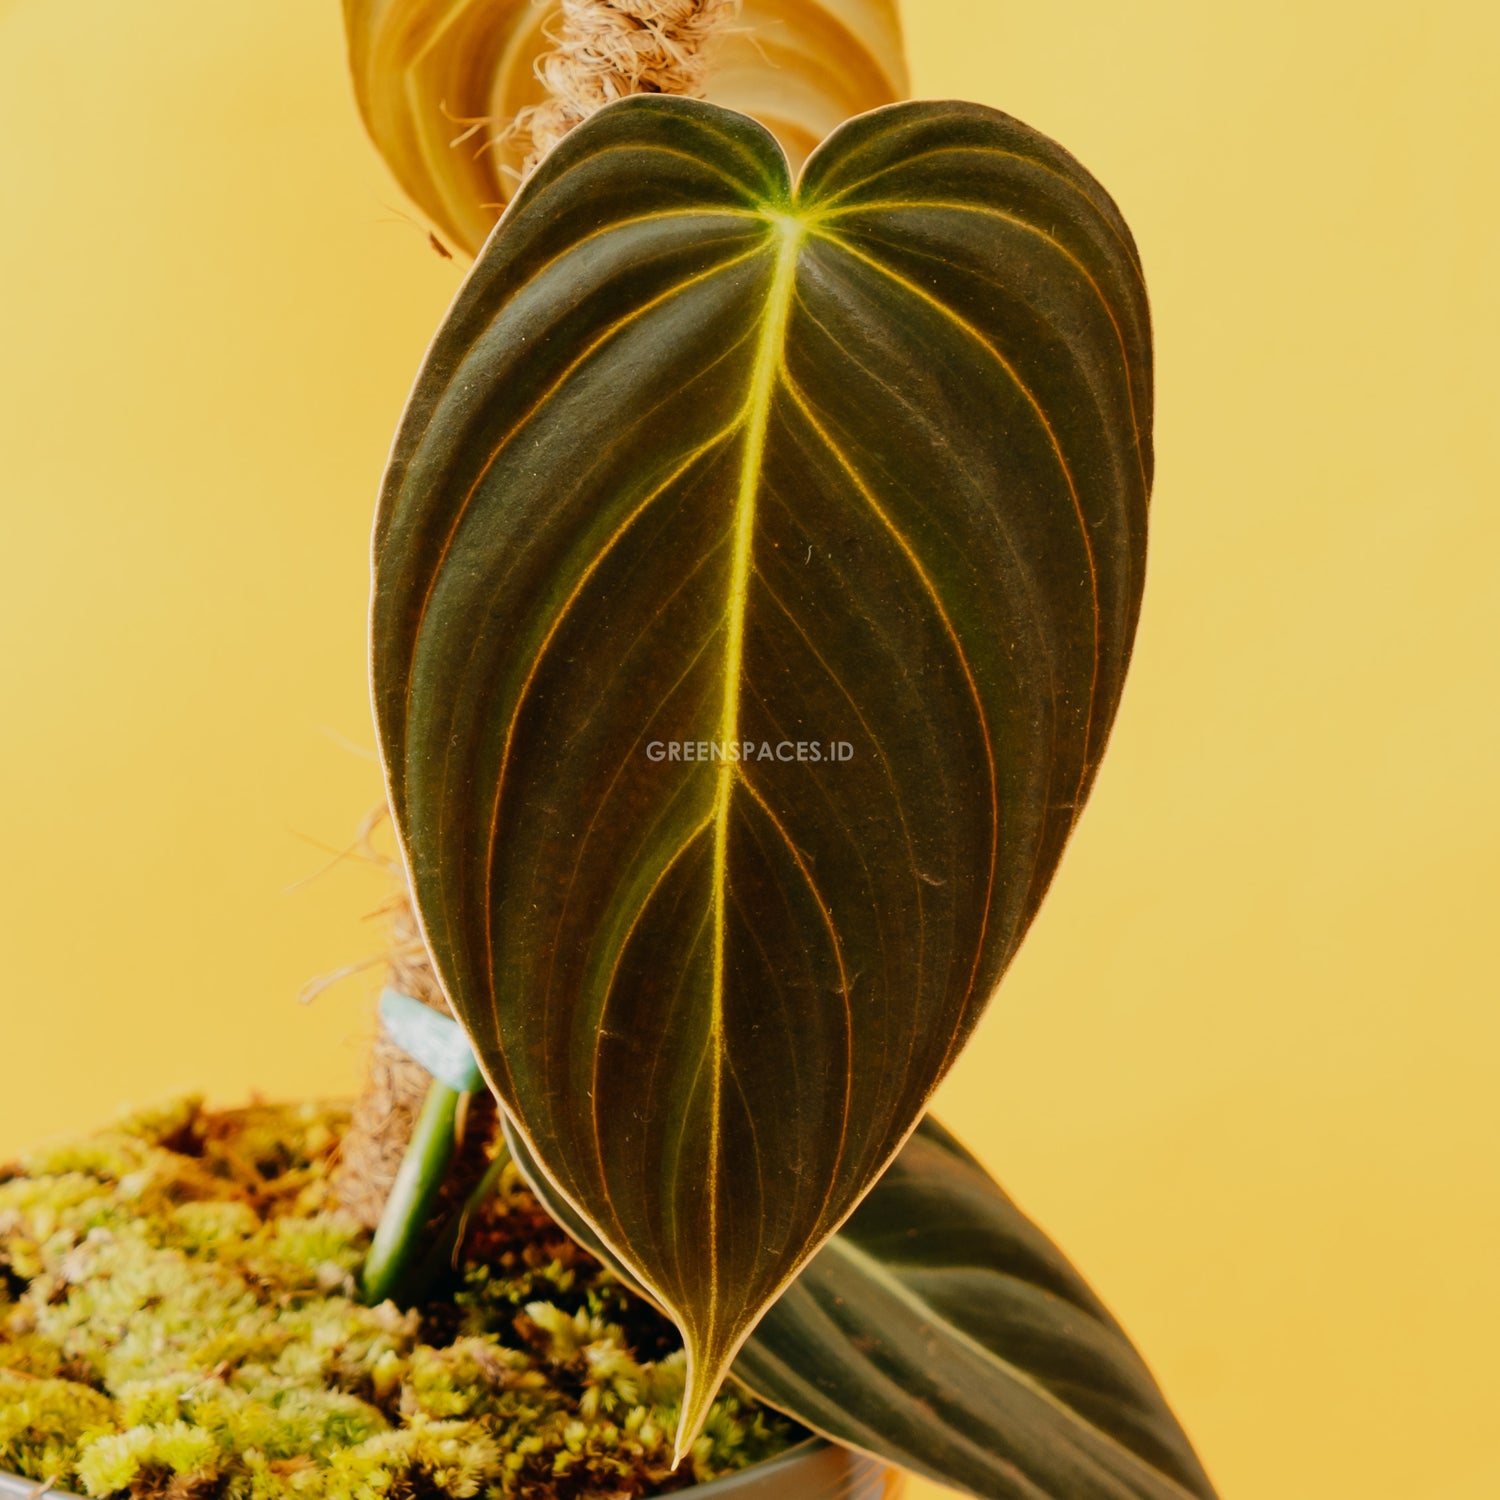 Philodendron melanochrysum - Greenspaces.id